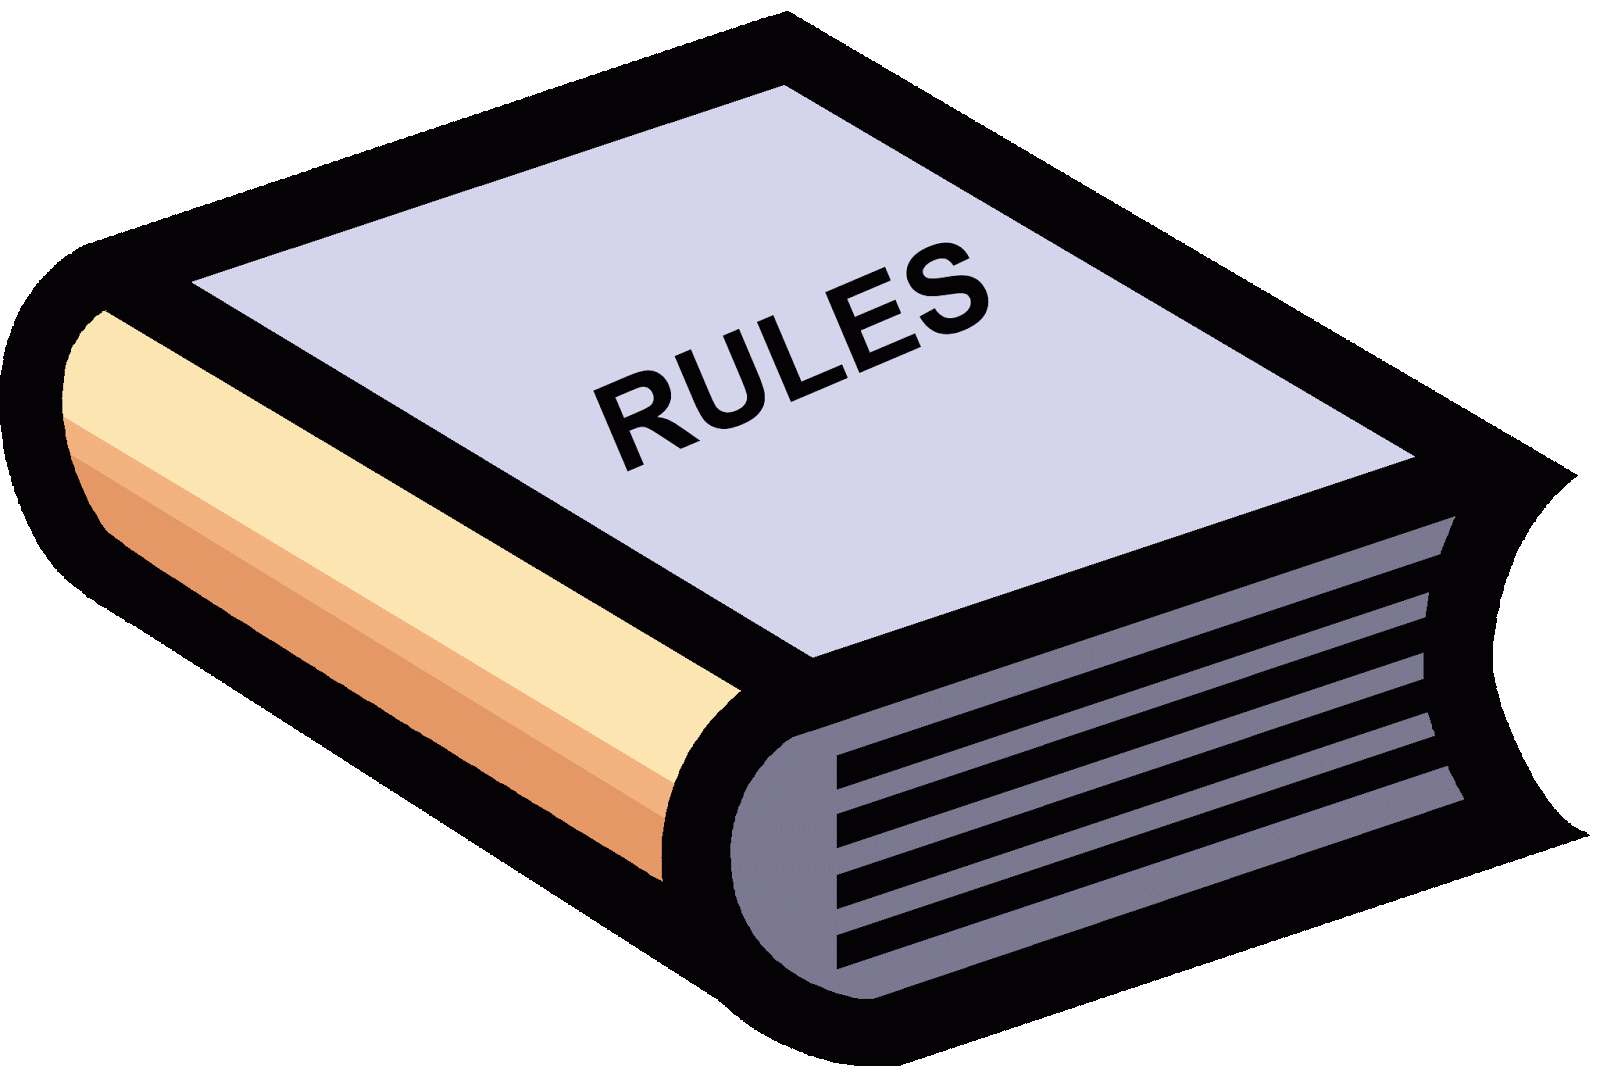 Washington courts have work. Rules clipart obligation